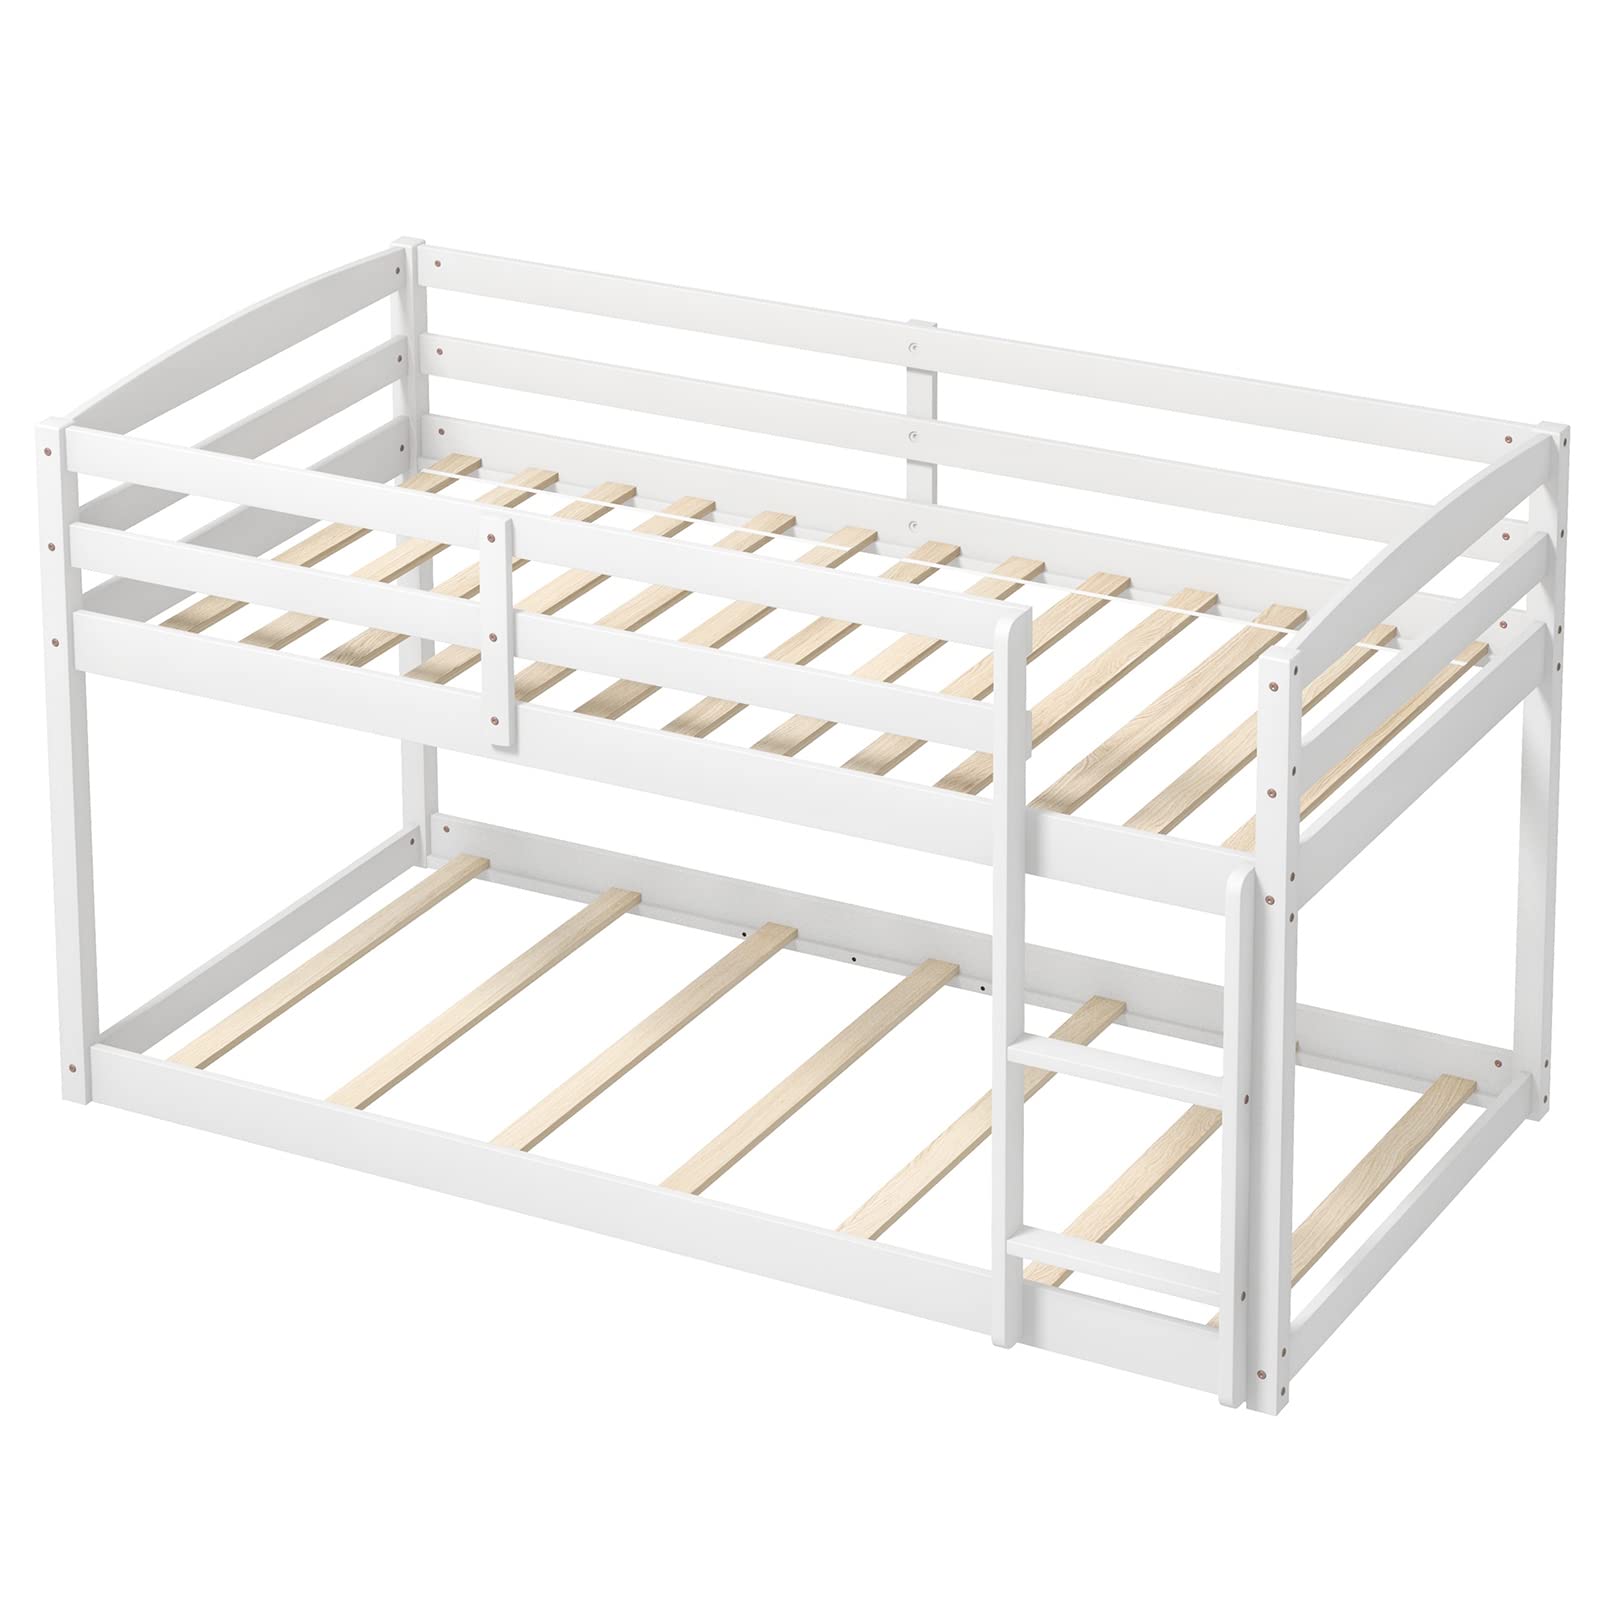 Giantex Twin Low Bunk Bed, Solid Wood Twin Over Twin Bunk Bed Frame with Full Guardrails & Integrated Ladder